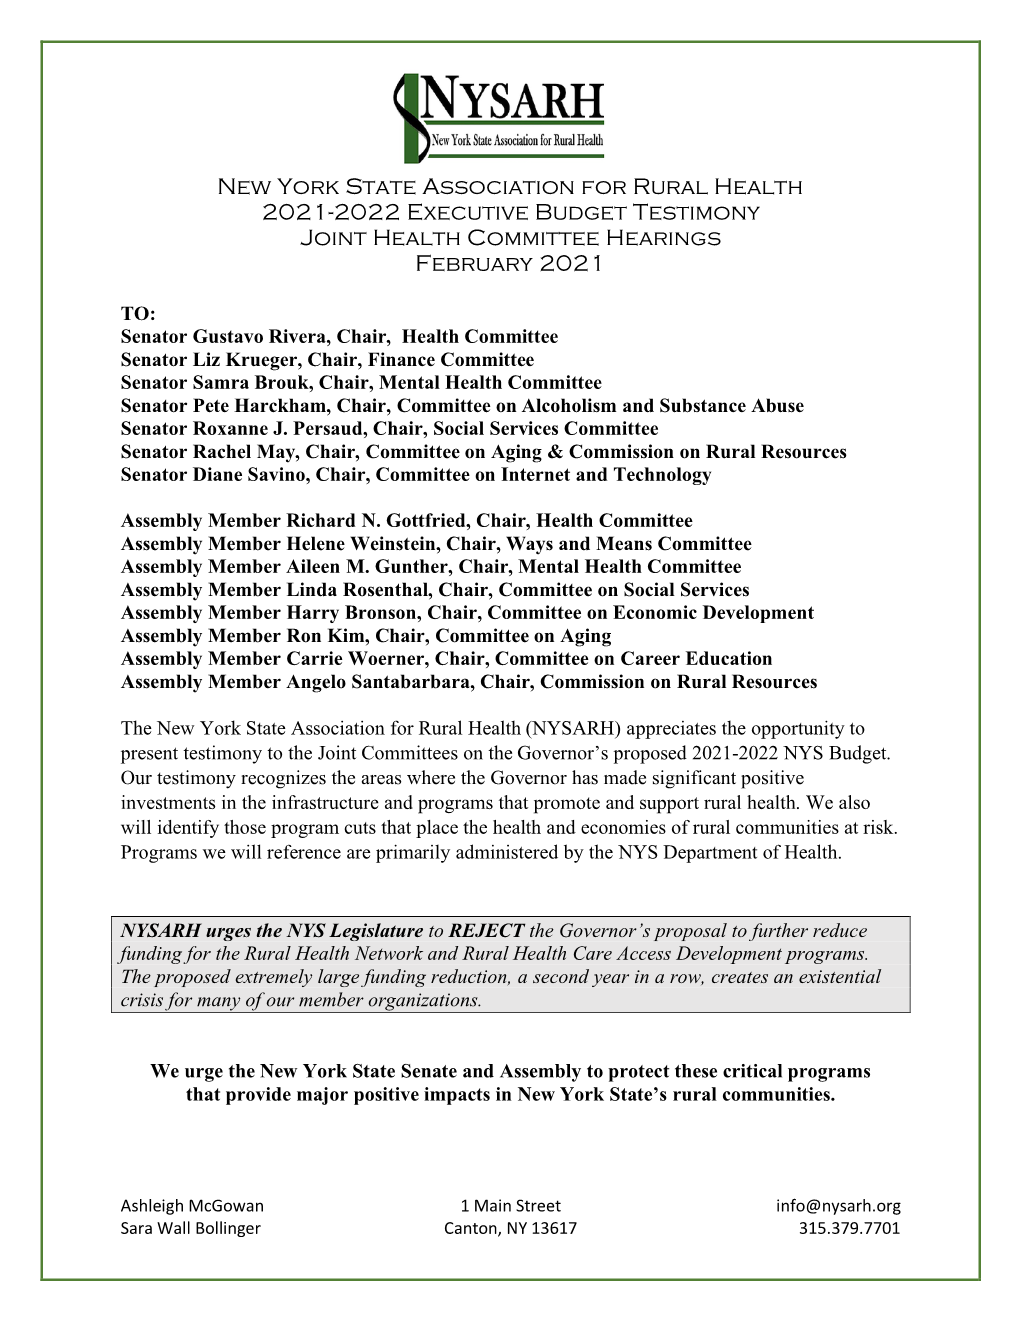 New York State Association for Rural Health 2021-2022 Executive Budget Testimony Joint Health Committee Hearings February 2021